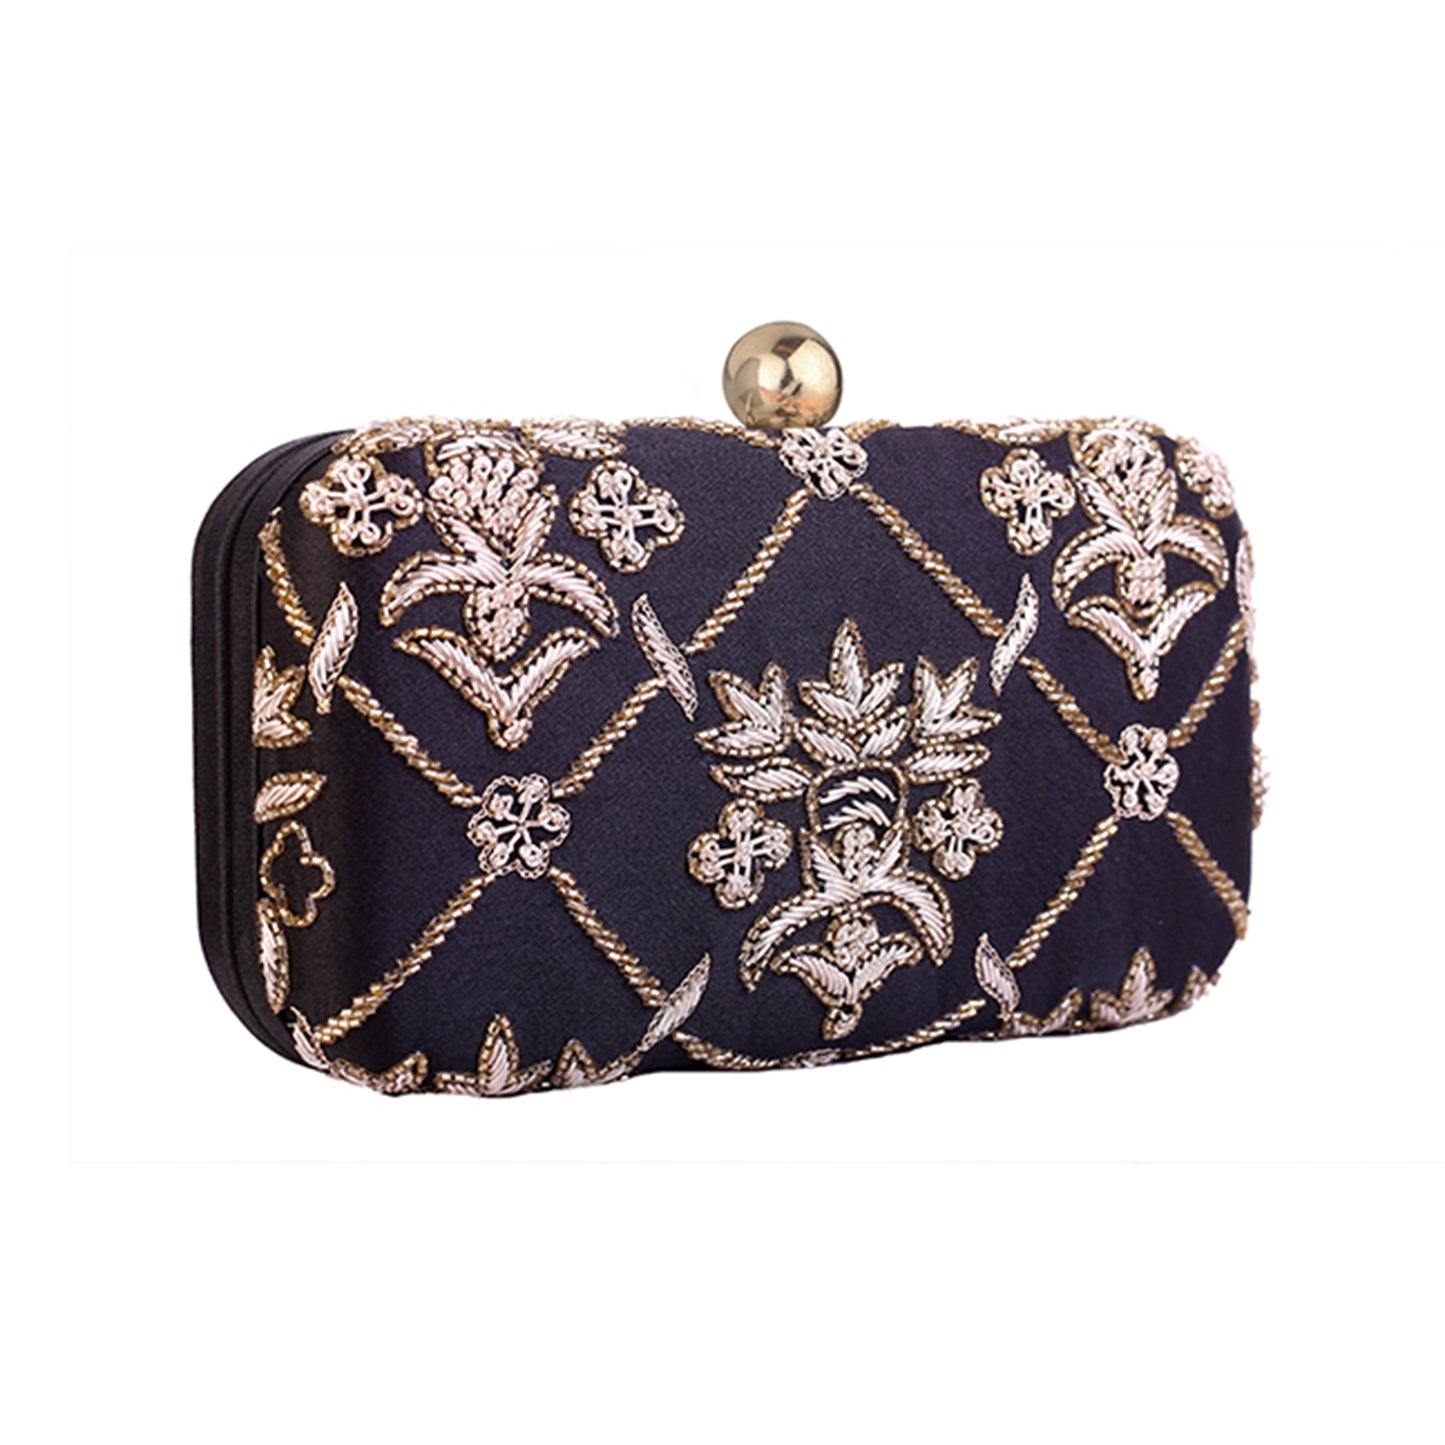 Angeline's Black Embroidery Clutch Bag